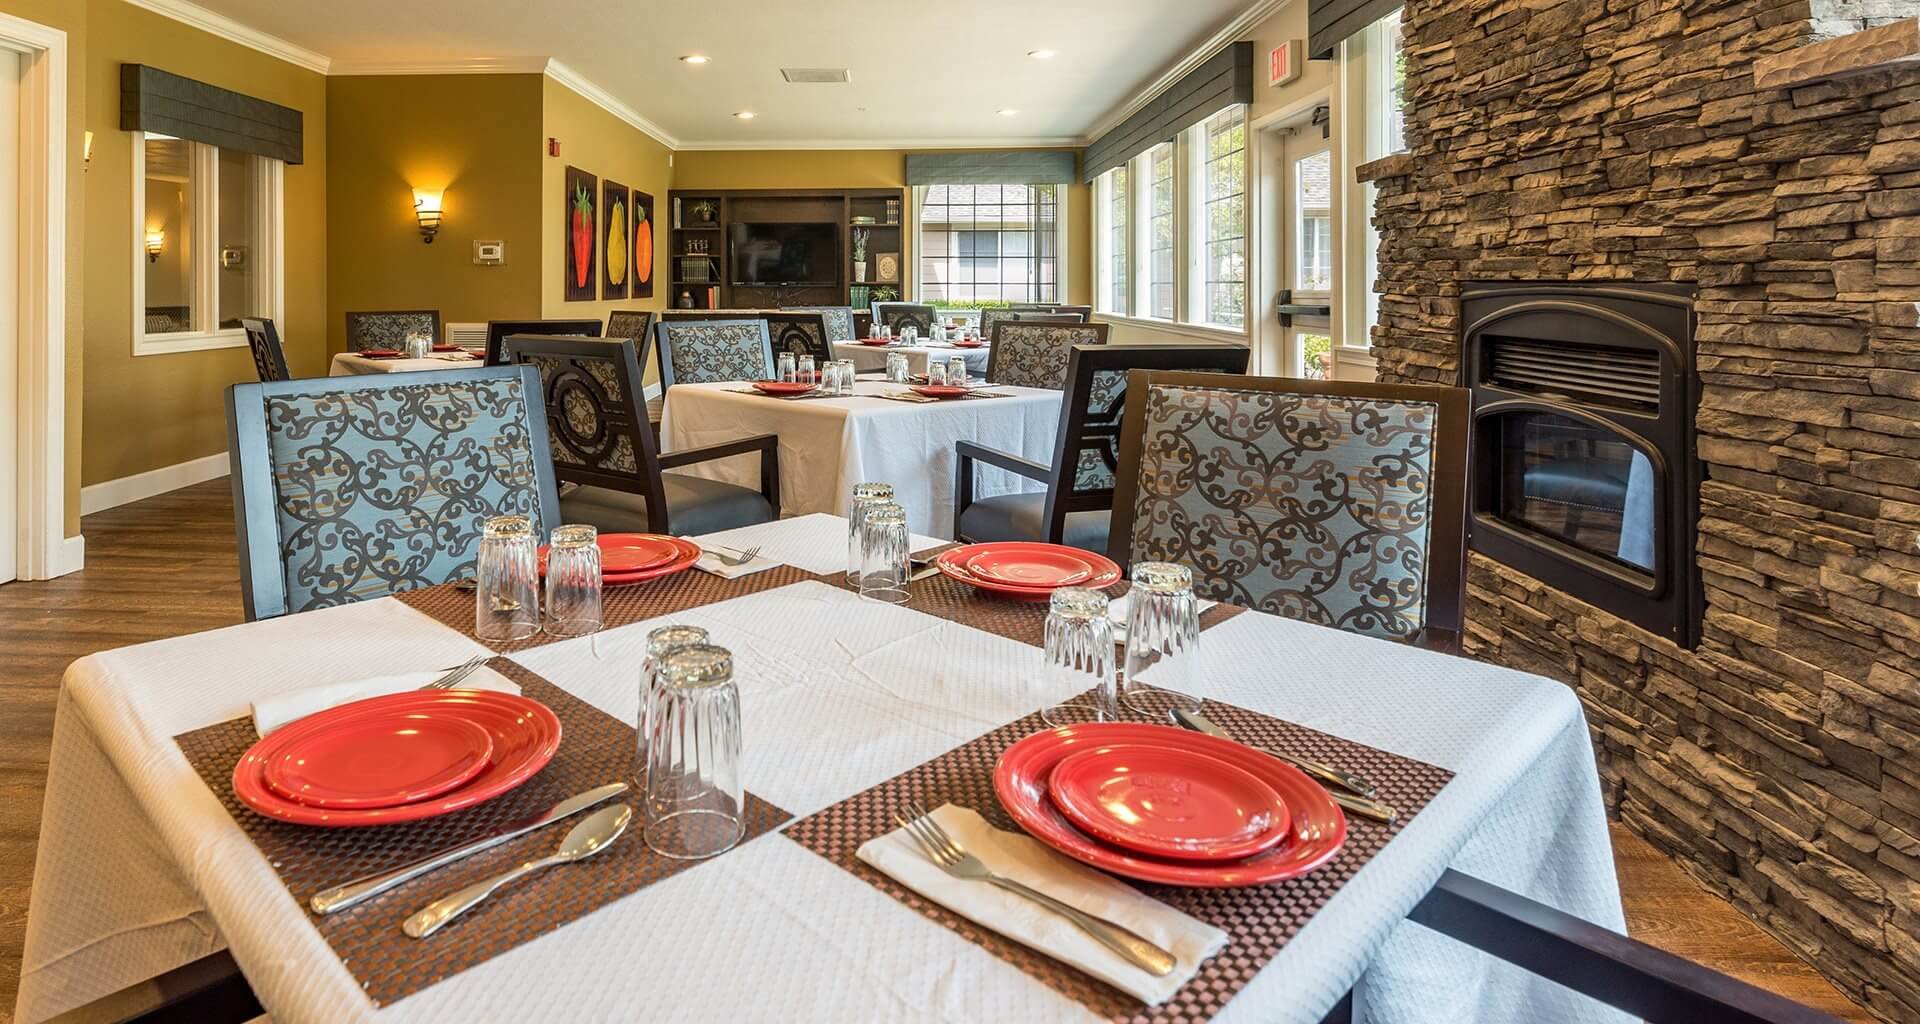 Dining Area for Healthy Meals at Pacifica Senior Living McMinnville, McMinnville, OR